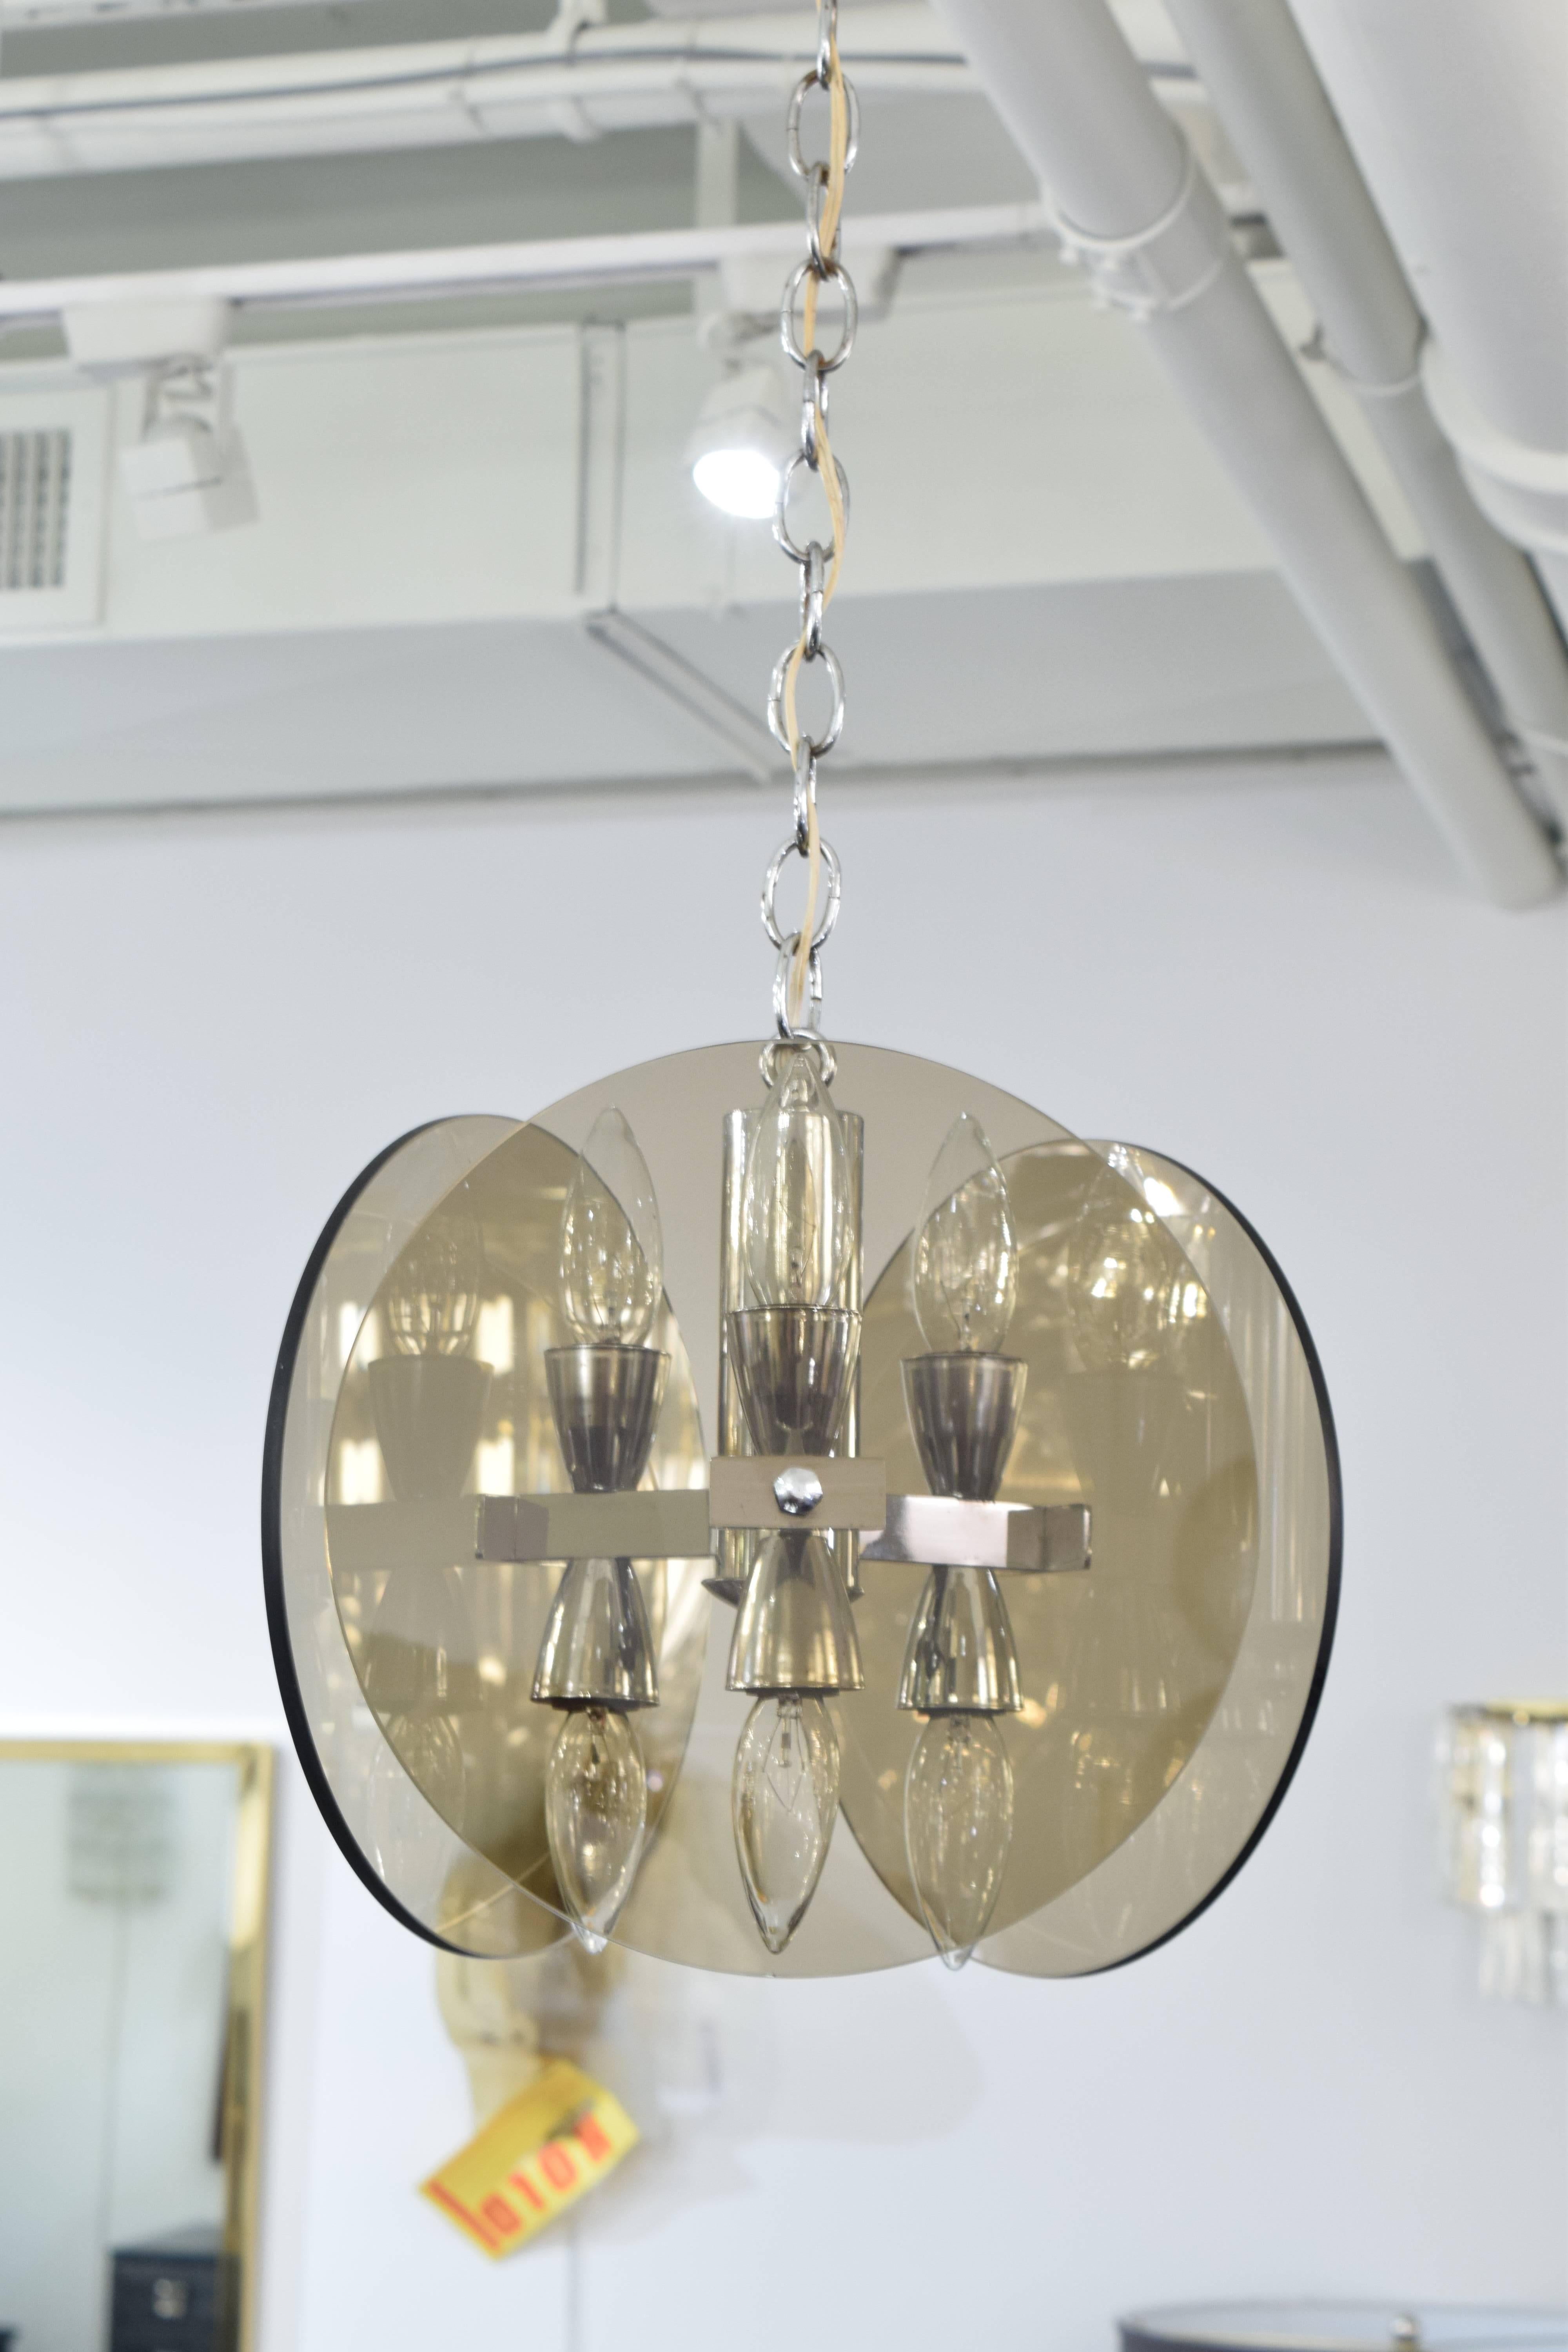 A smoked glass chandelier in the manner of Fontana Arte, with three glass circles each with a diameter of 12